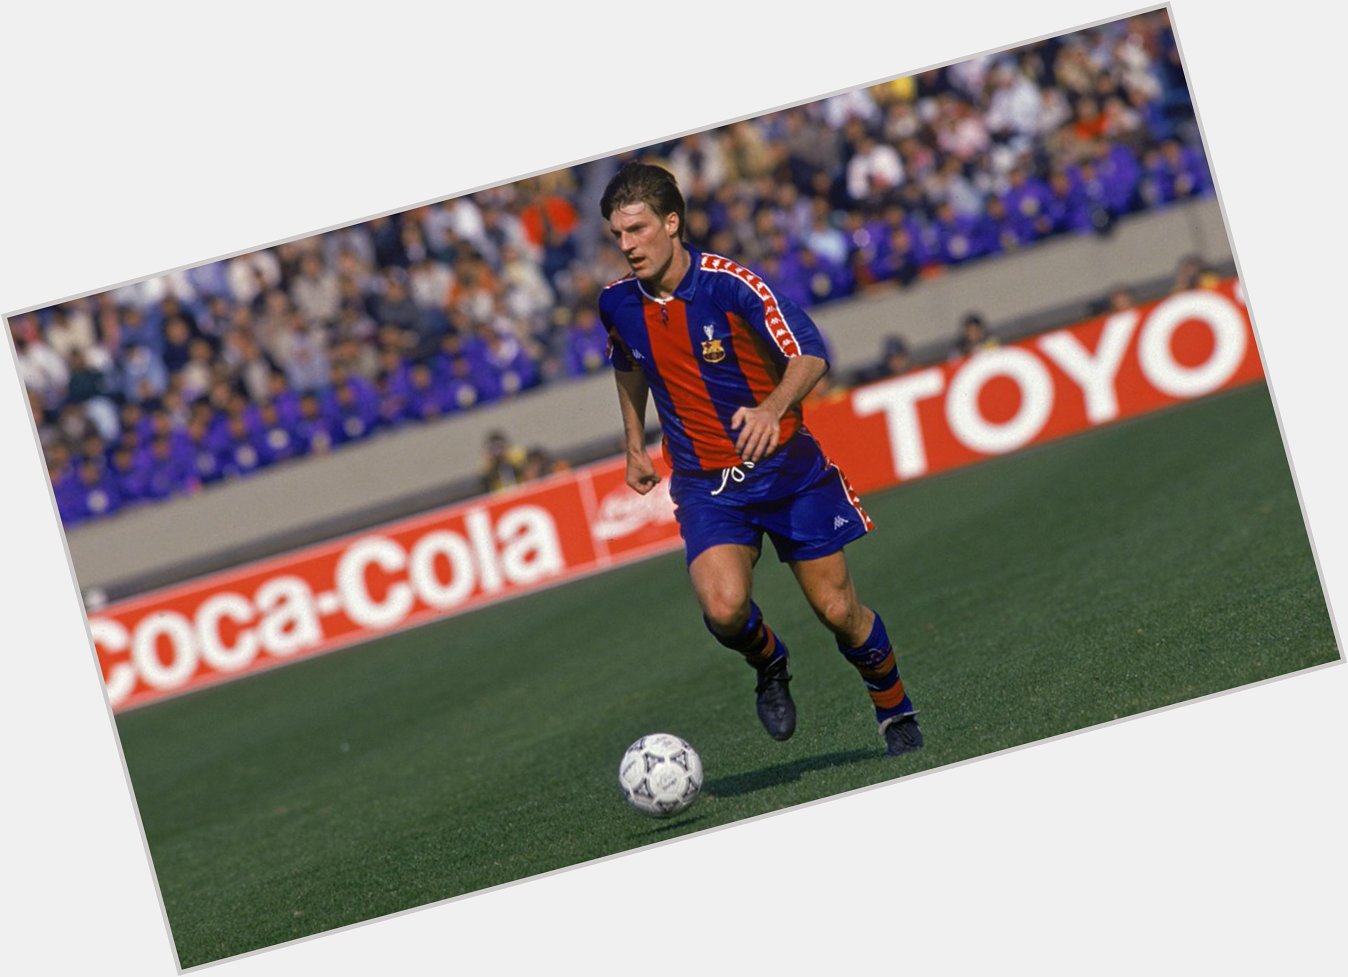 We wish Michael Laudrup (ex-Barca) a very happy birthday. He turns 54 today. 